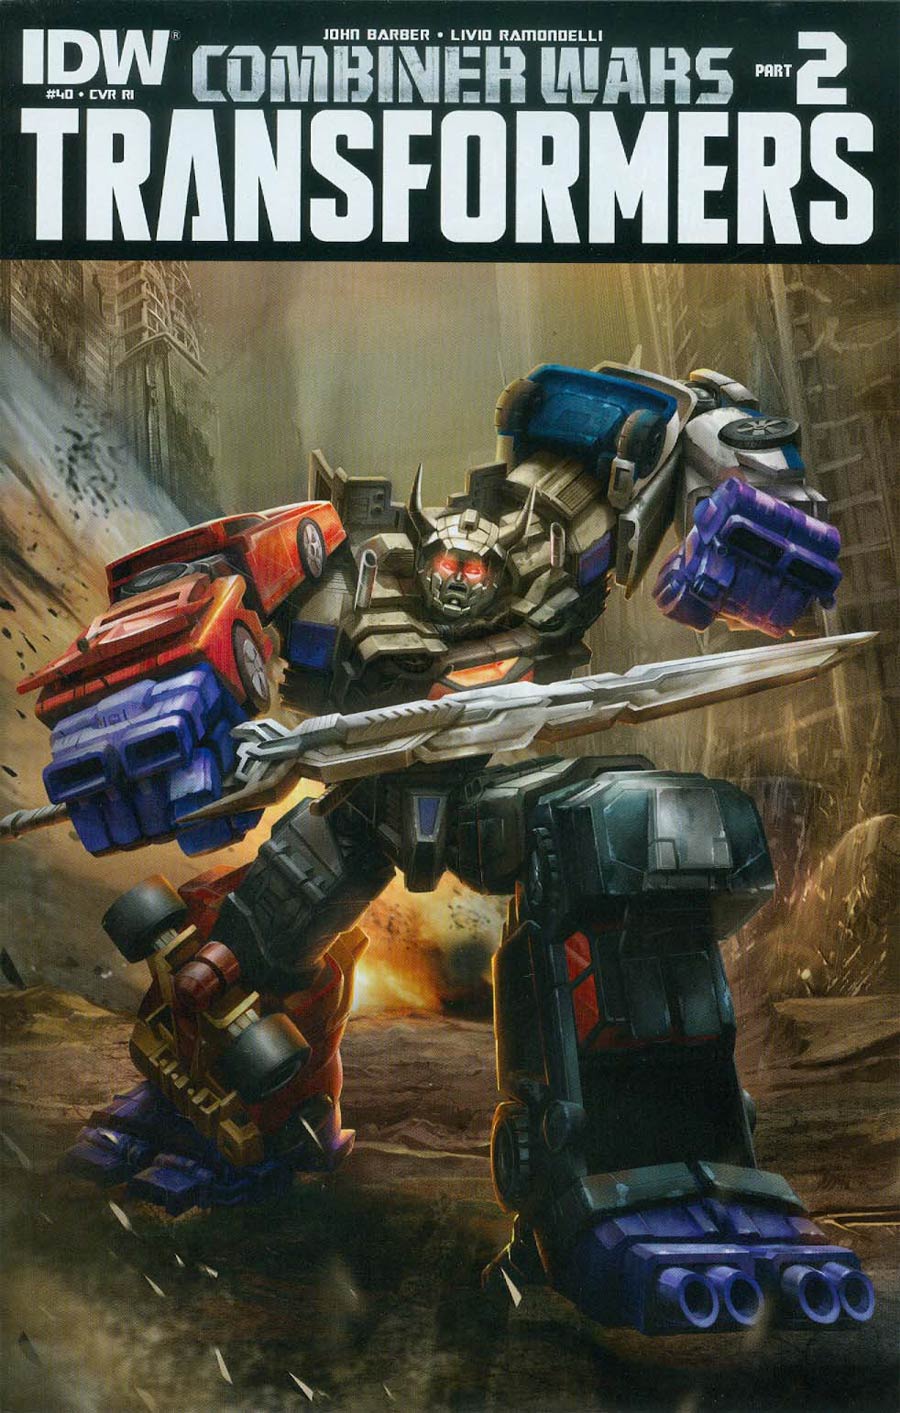 Transformers Vol 3 #40 Cover C Incentive Hasbro Combiner Wars Poster Variant Cover (Combiner Wars Part 2)